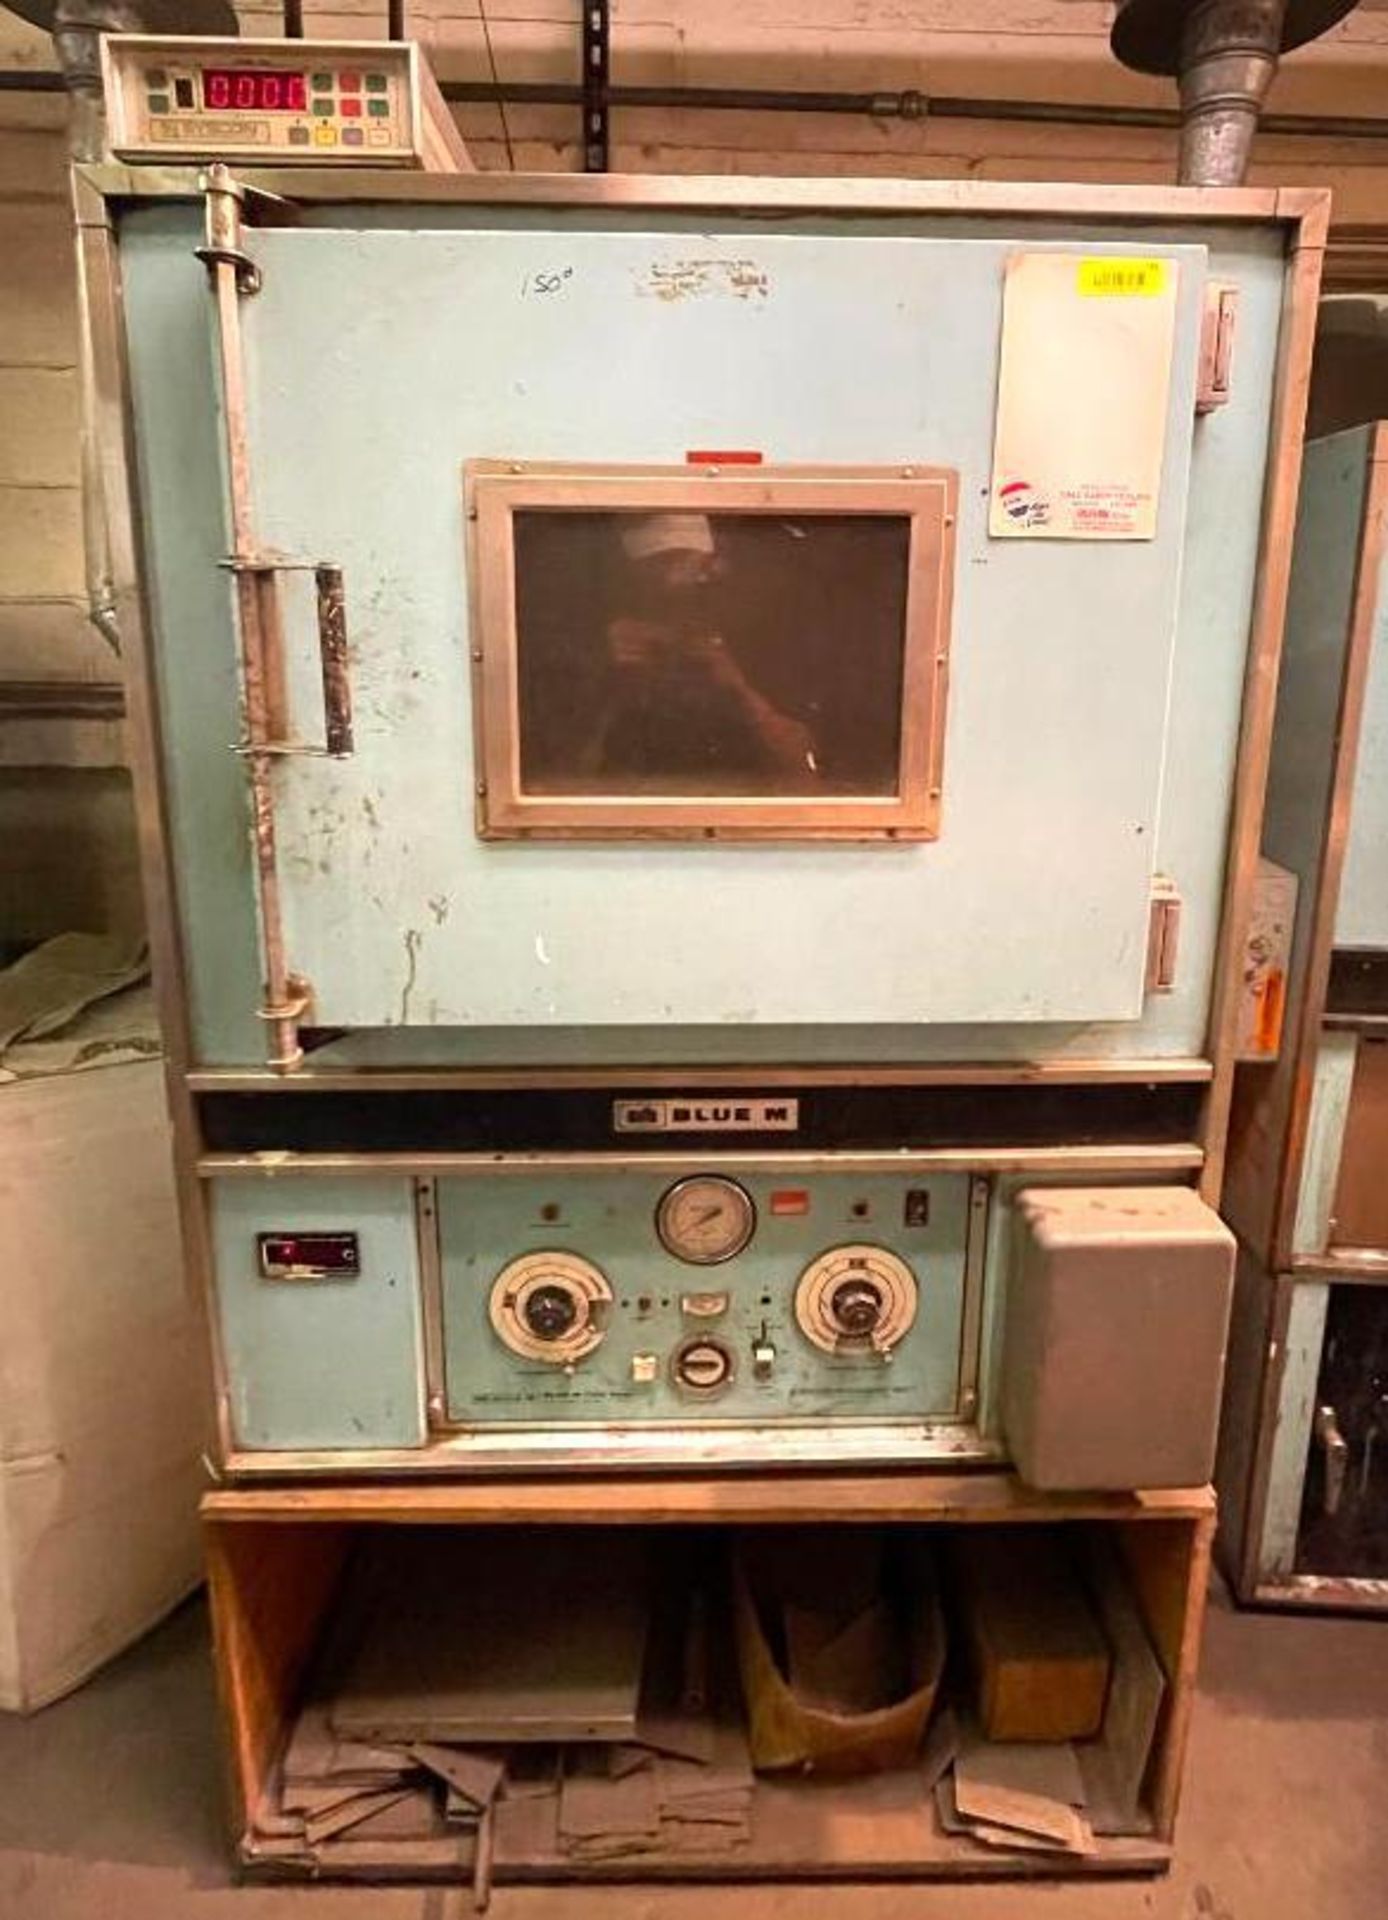 BLUE M POWER-O-MATIC 70 INDUSTRIAL OVEN W/ SYSCON DIGITAL TEMPERATURE INDICATOR BRAND/MODEL: BLUE M - Image 3 of 12